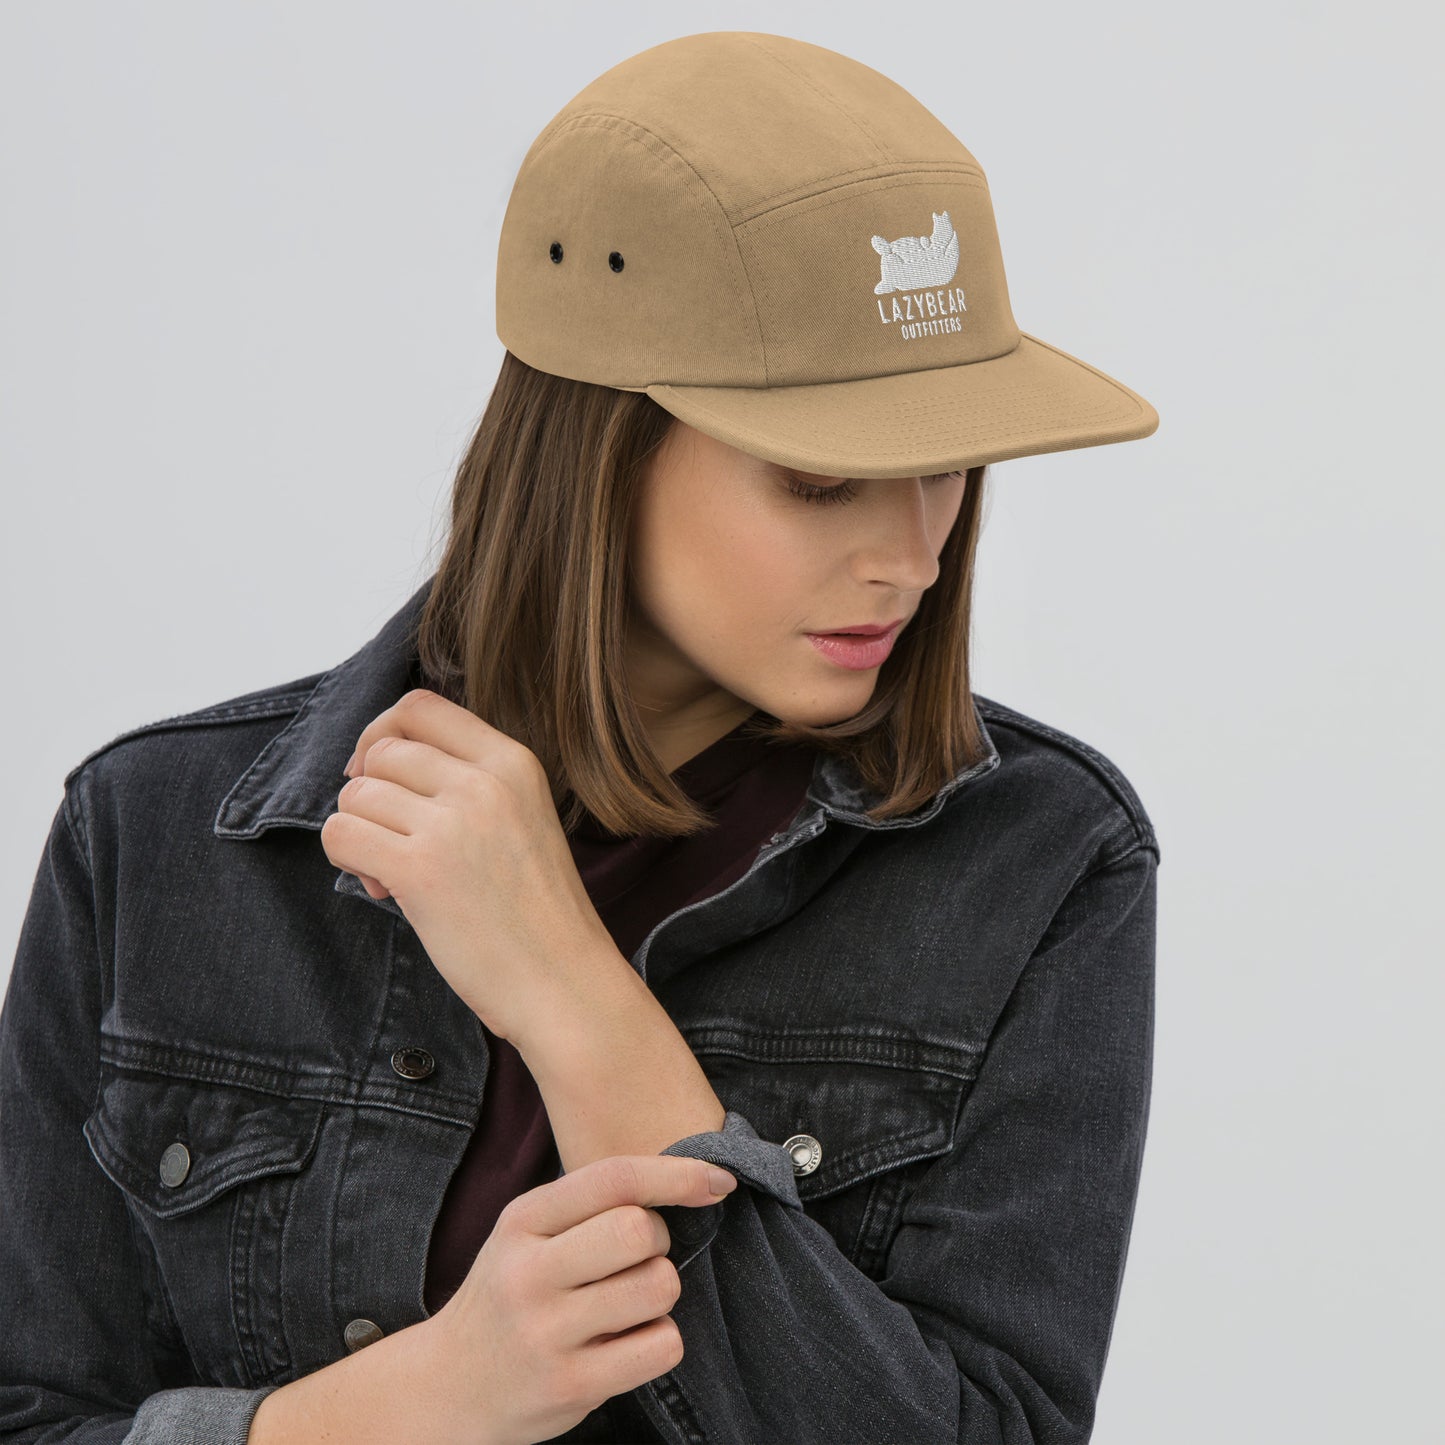 Lazy Bear Outfitters' 5-Panel Mountain Hat